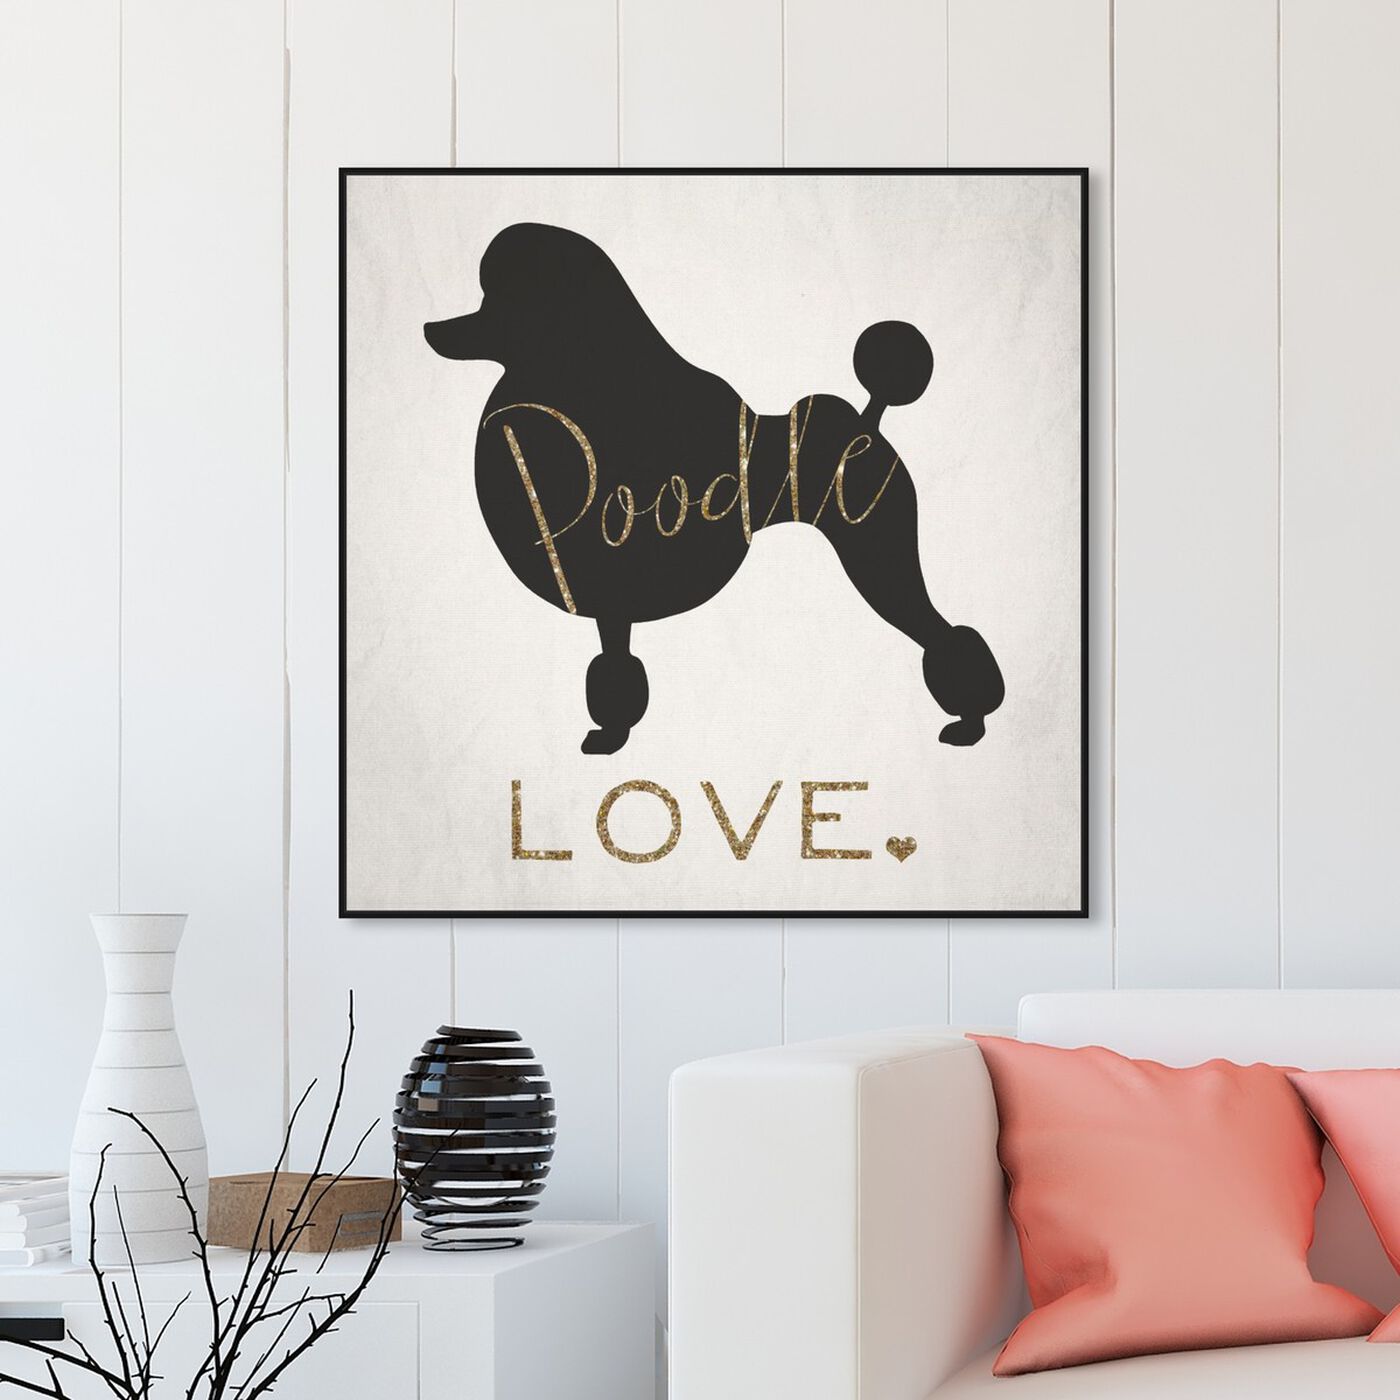 Hanging view of Poodle Love featuring animals and dogs and puppies art.